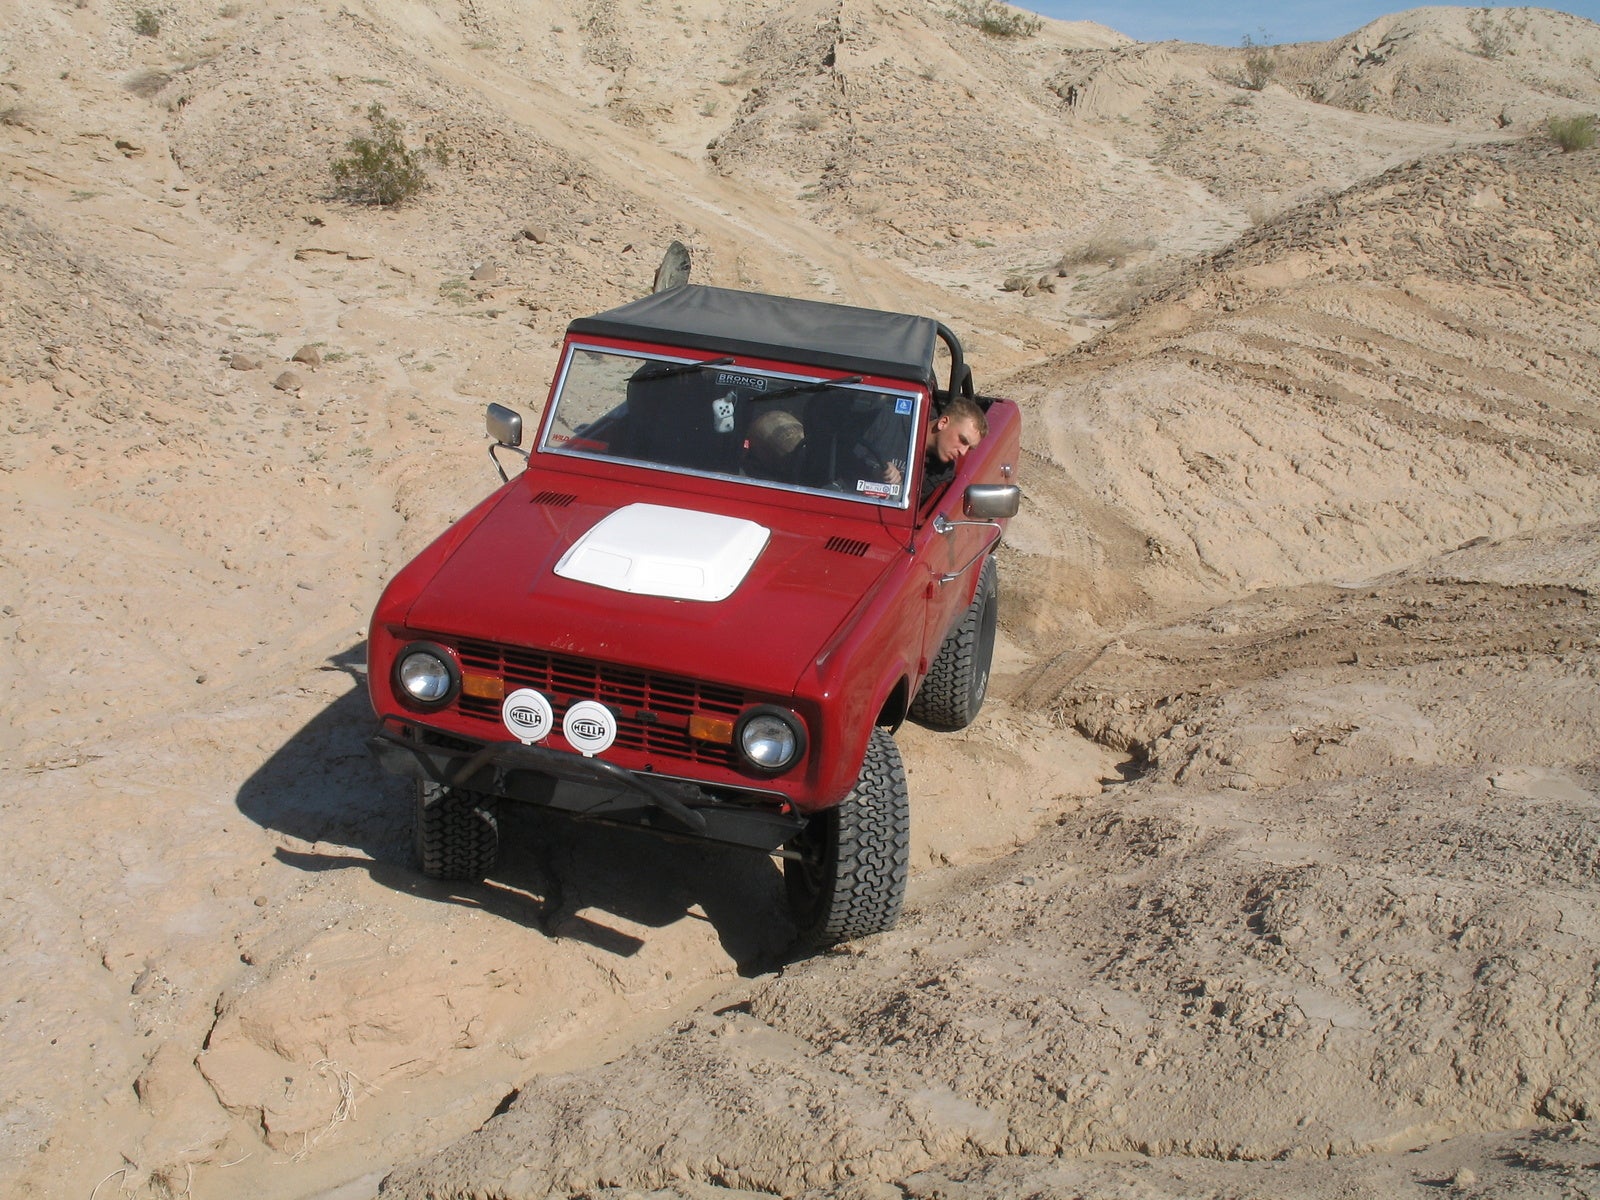 1969 Ford Bronco picture, exterior